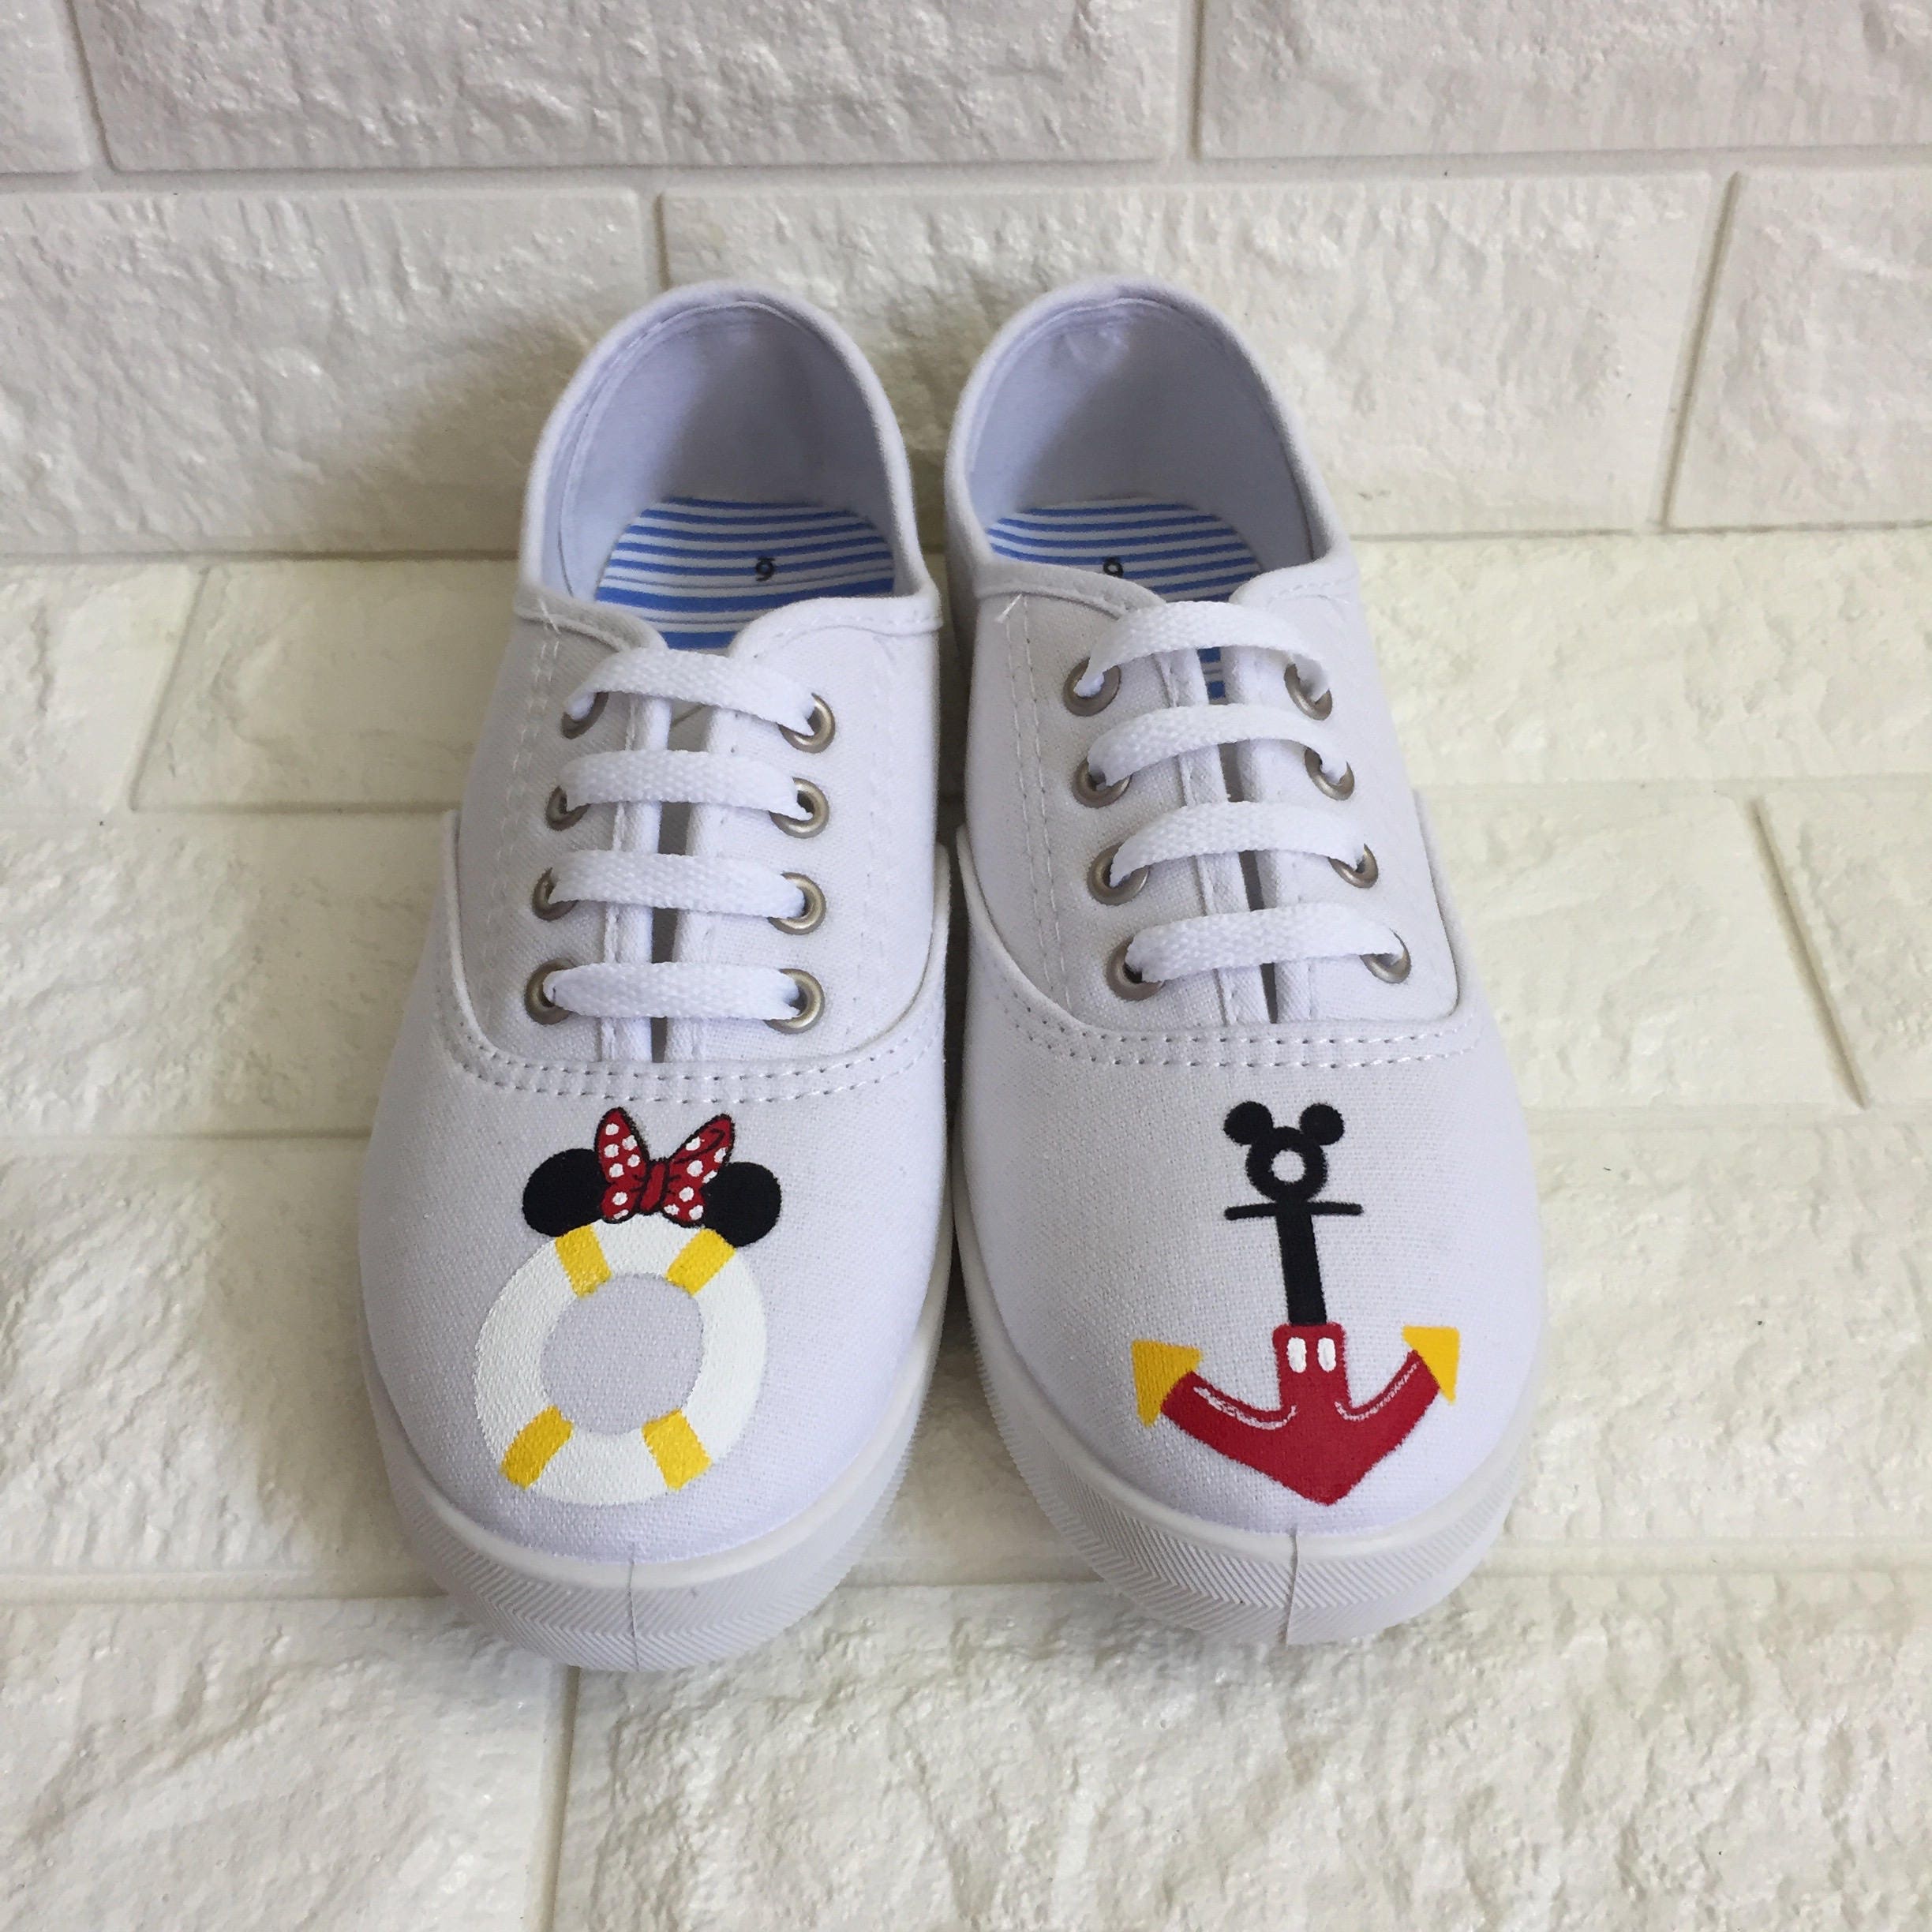 Cute Disney Cruise Shoes Mickey Mouse Clubhouse Cruiseship | Etsy